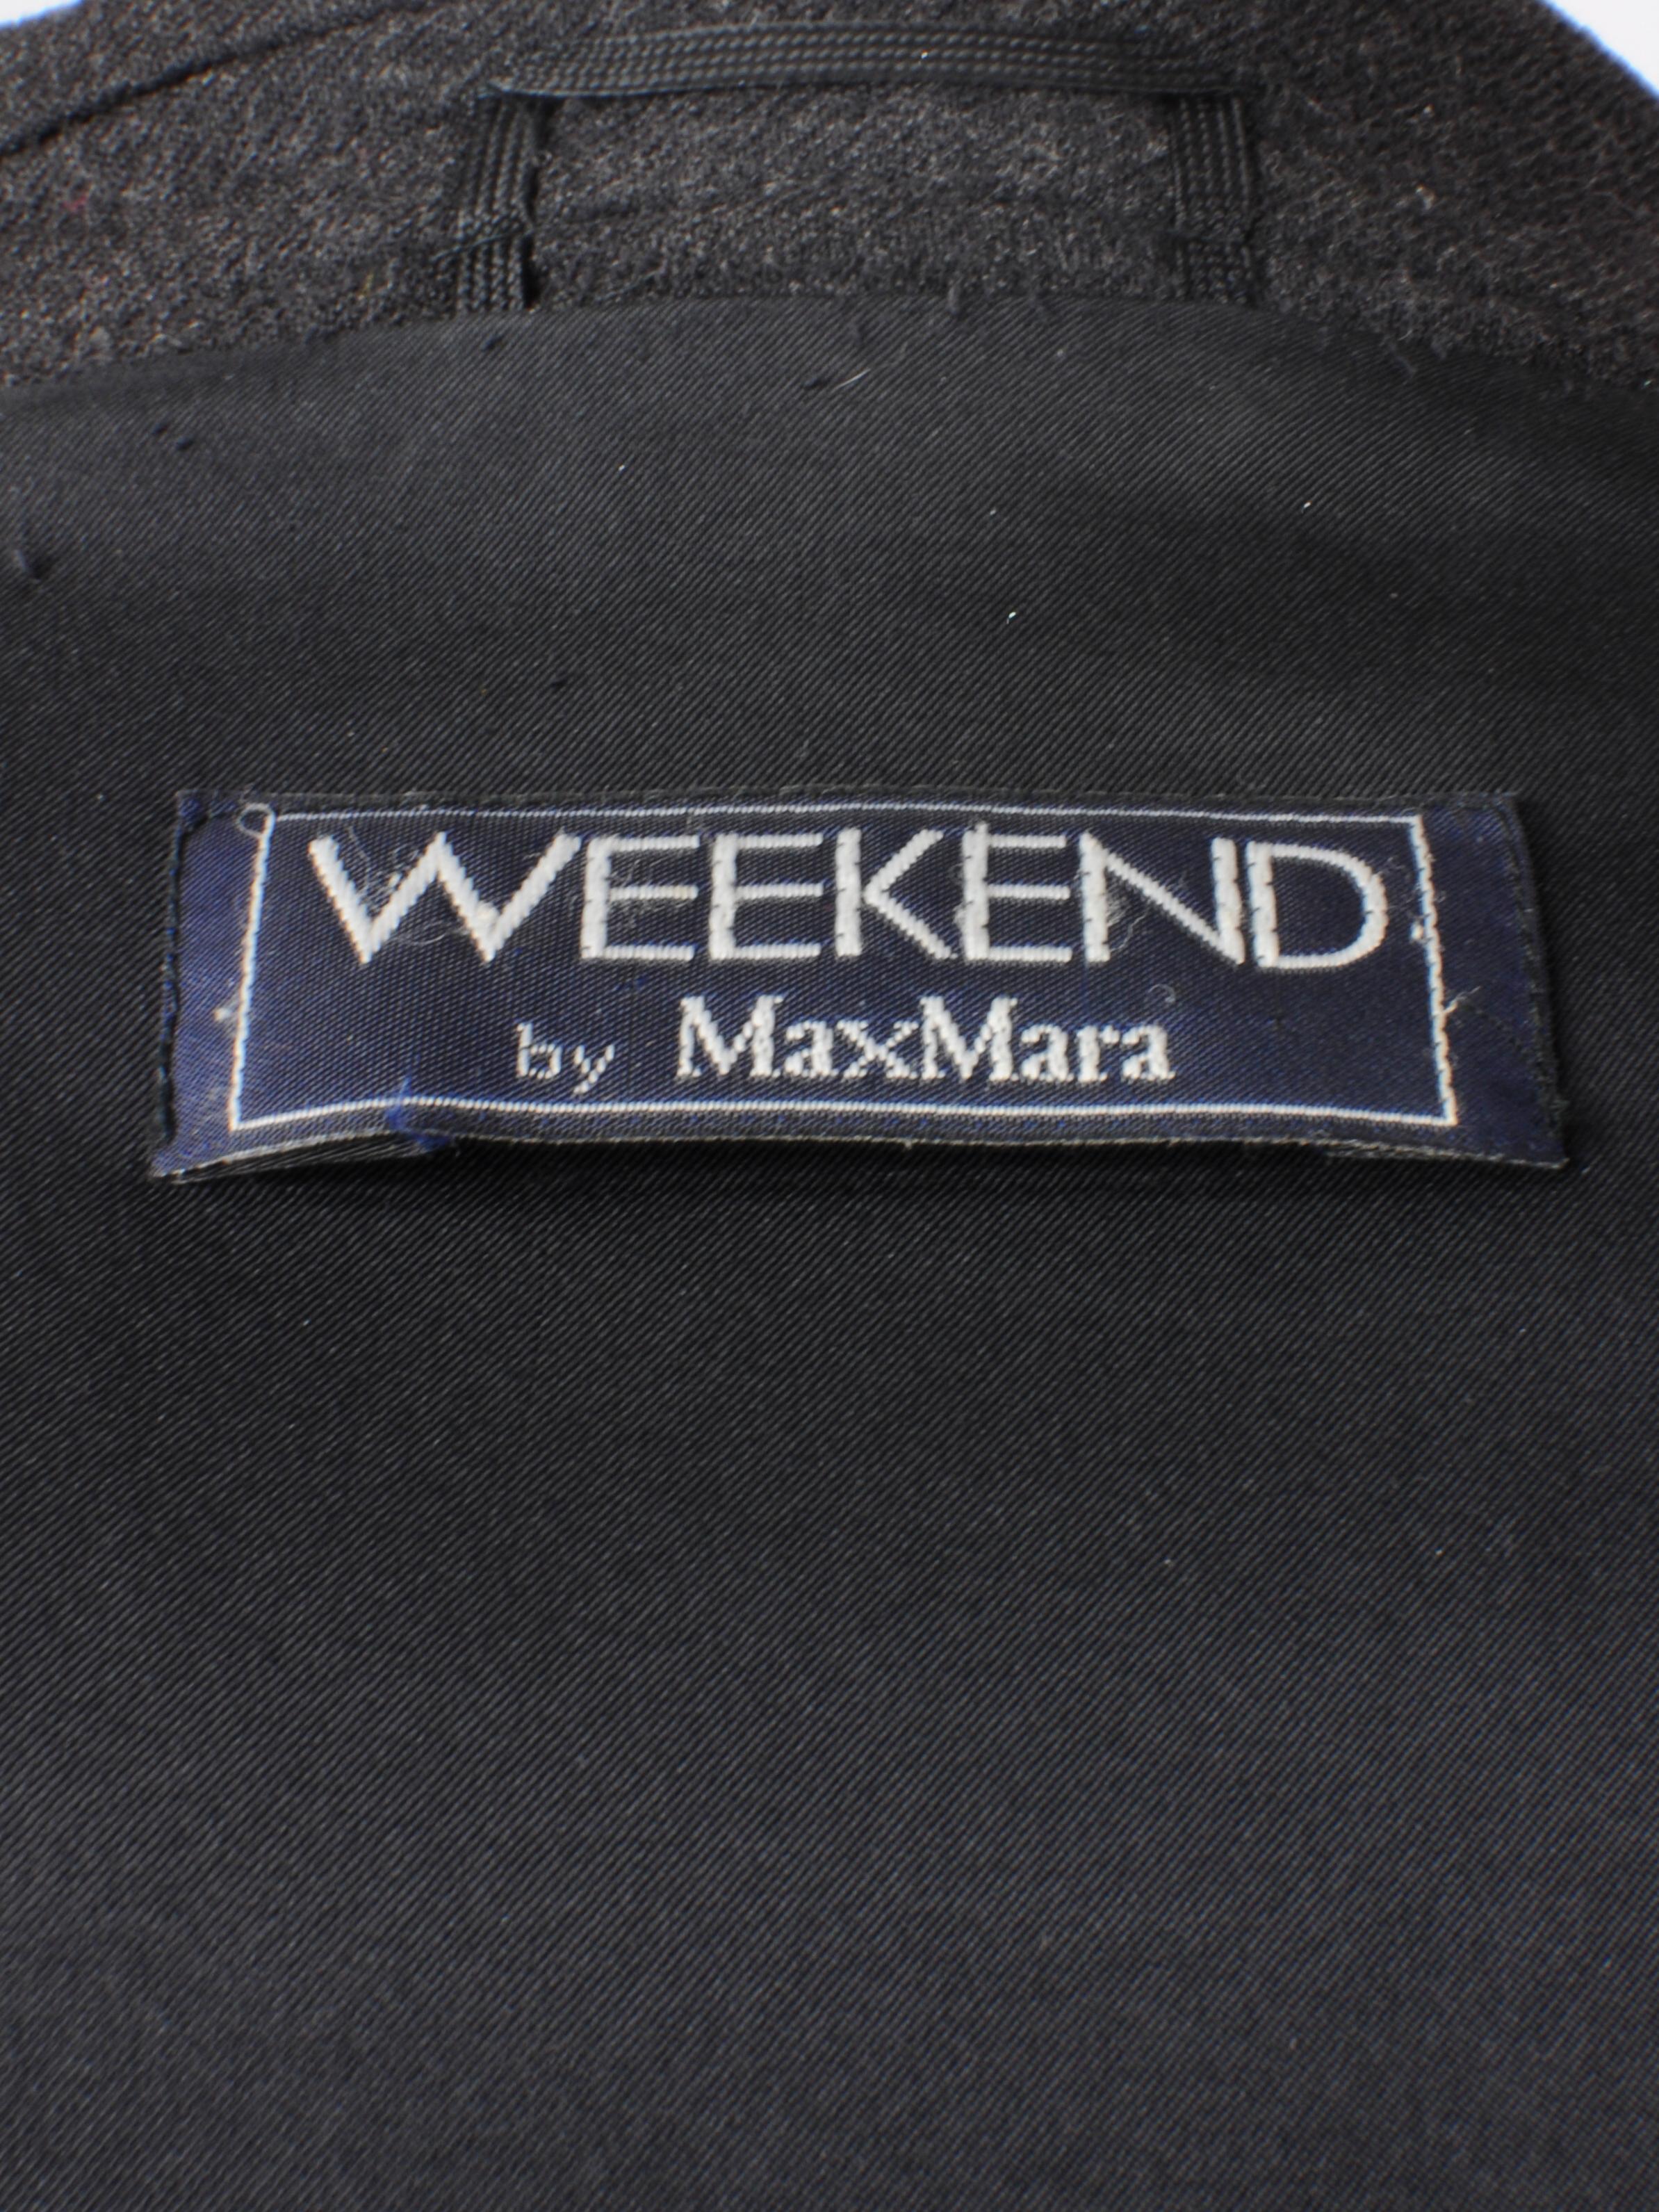 Weekend by Max Mara Single Breasted Blazer with Safari Pockets 1990s For Sale 4